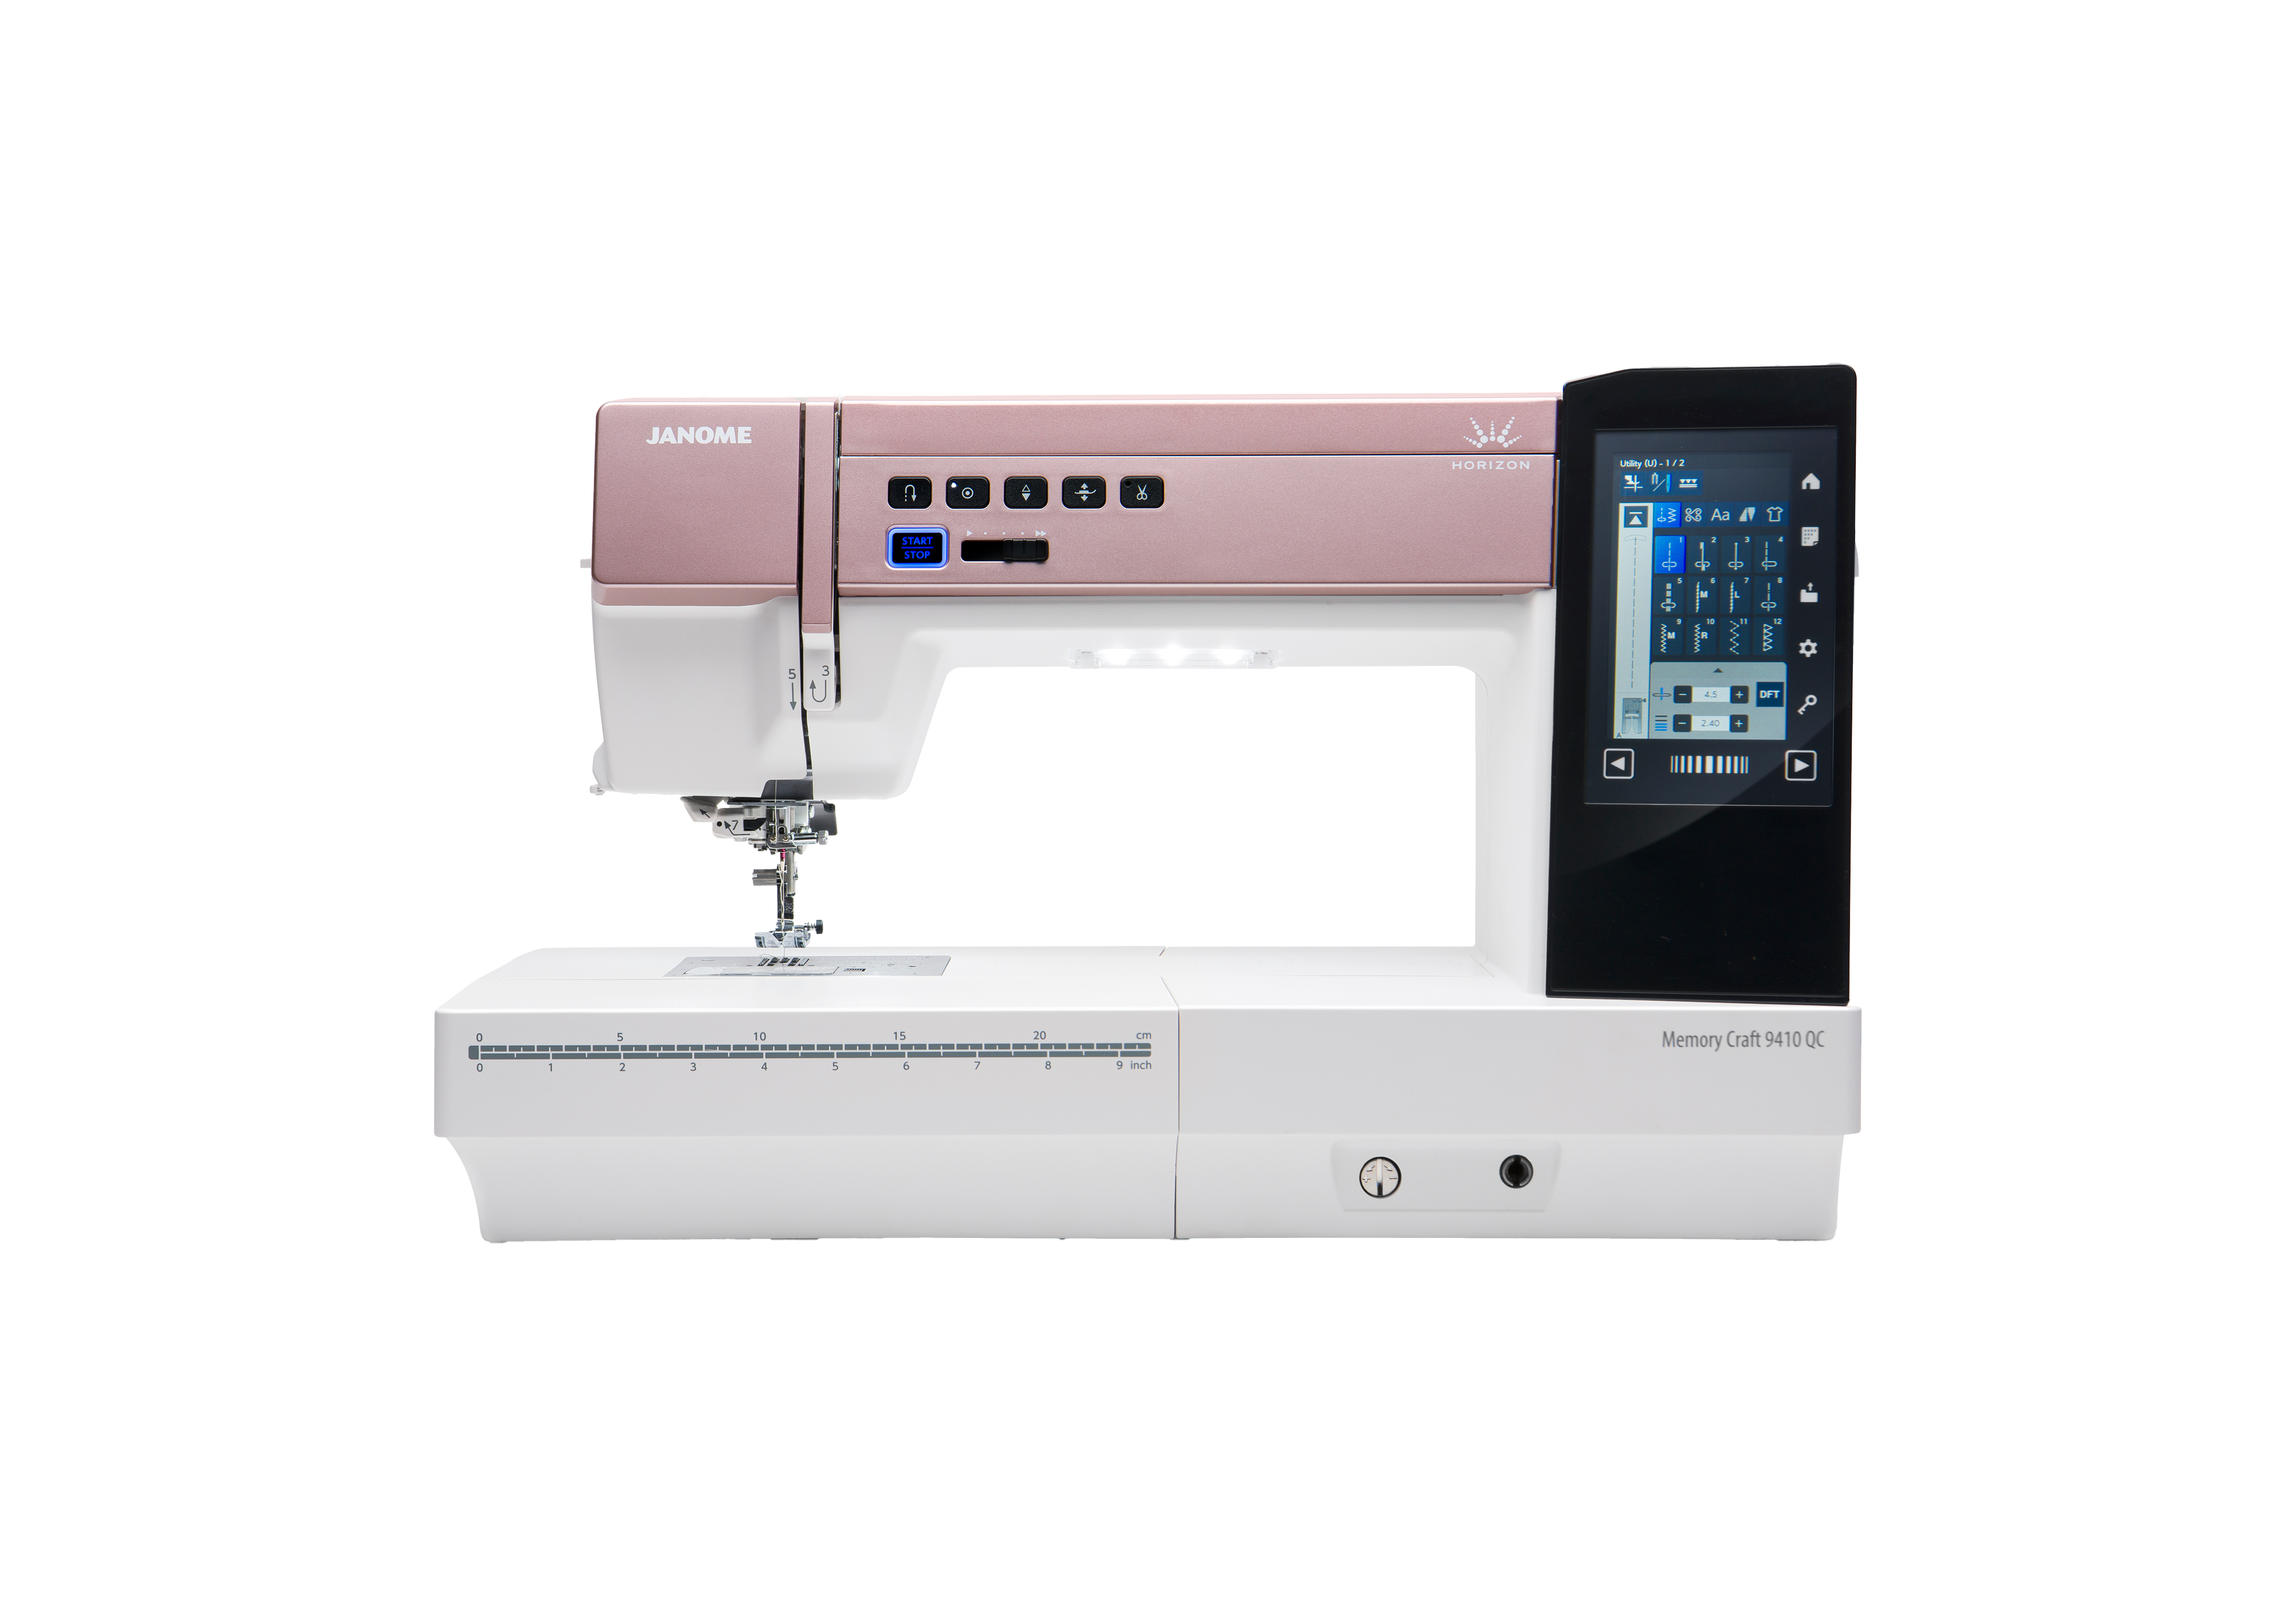 Janome Horizon Memory Craft 9410QC Sewing Machine for Sale at World Weidner